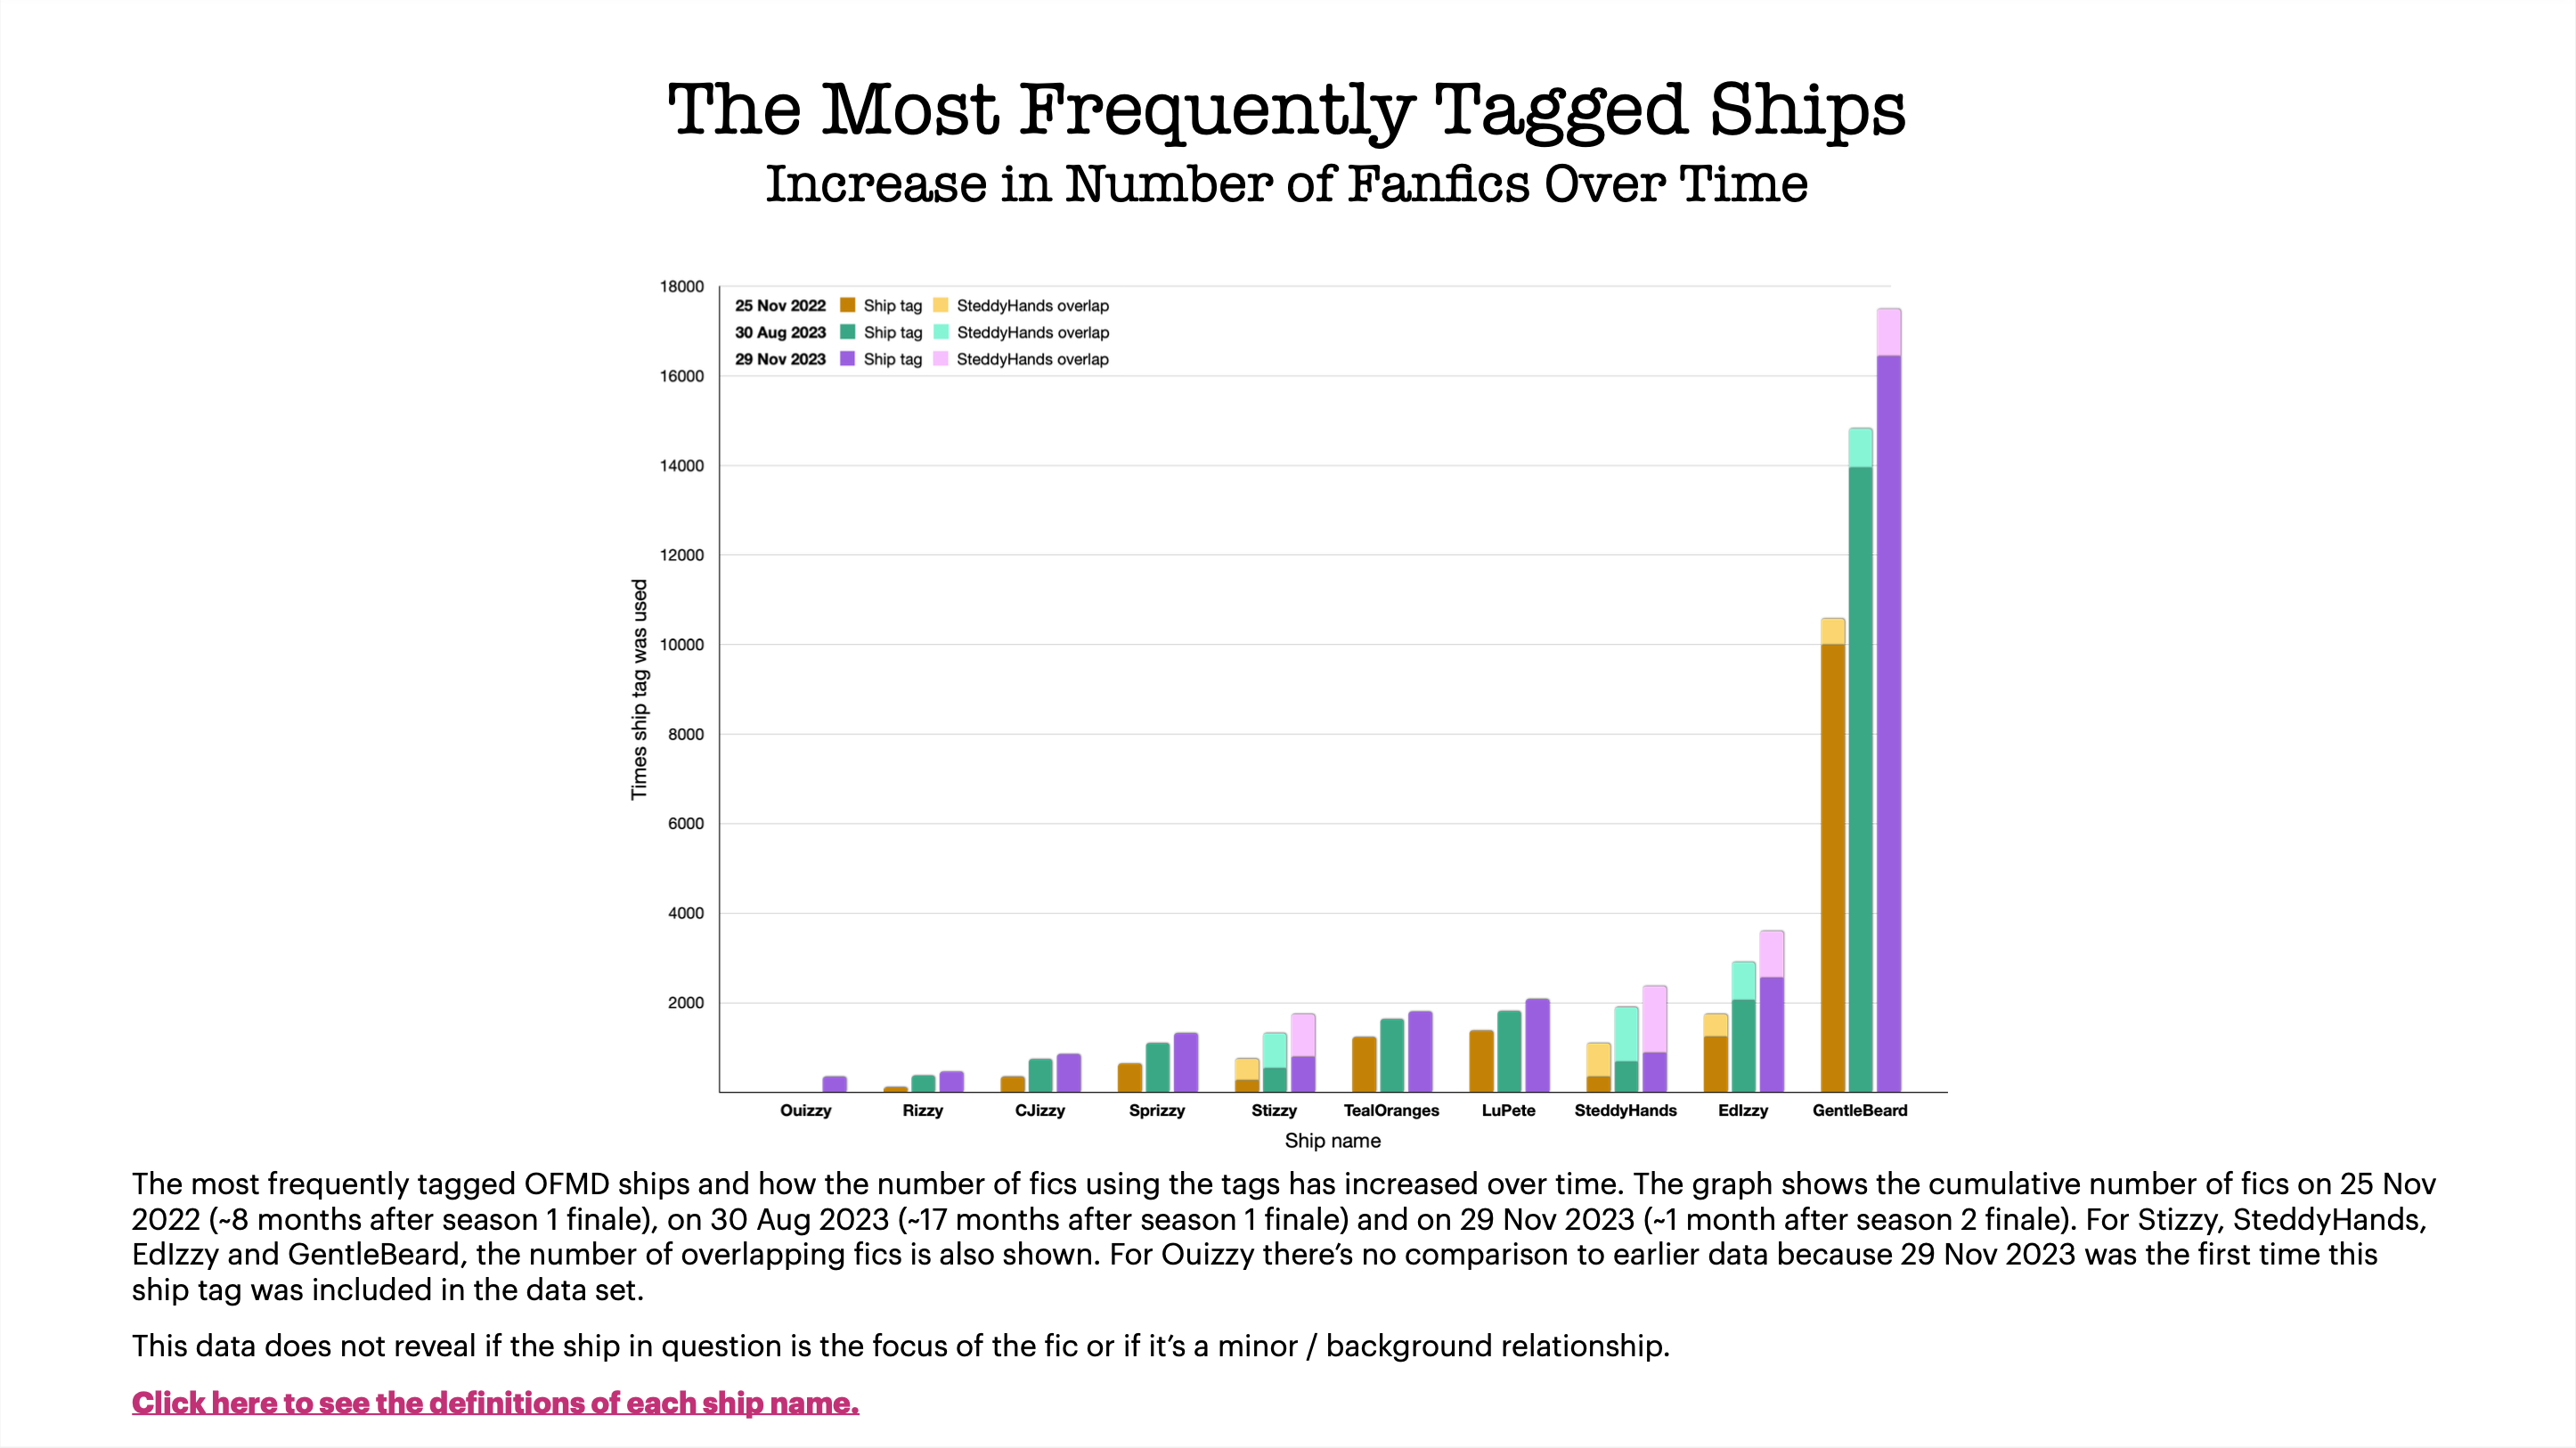 A grouped bar chart showing the most frequently tagged ships and increase in number of fanfics over time for each ship.